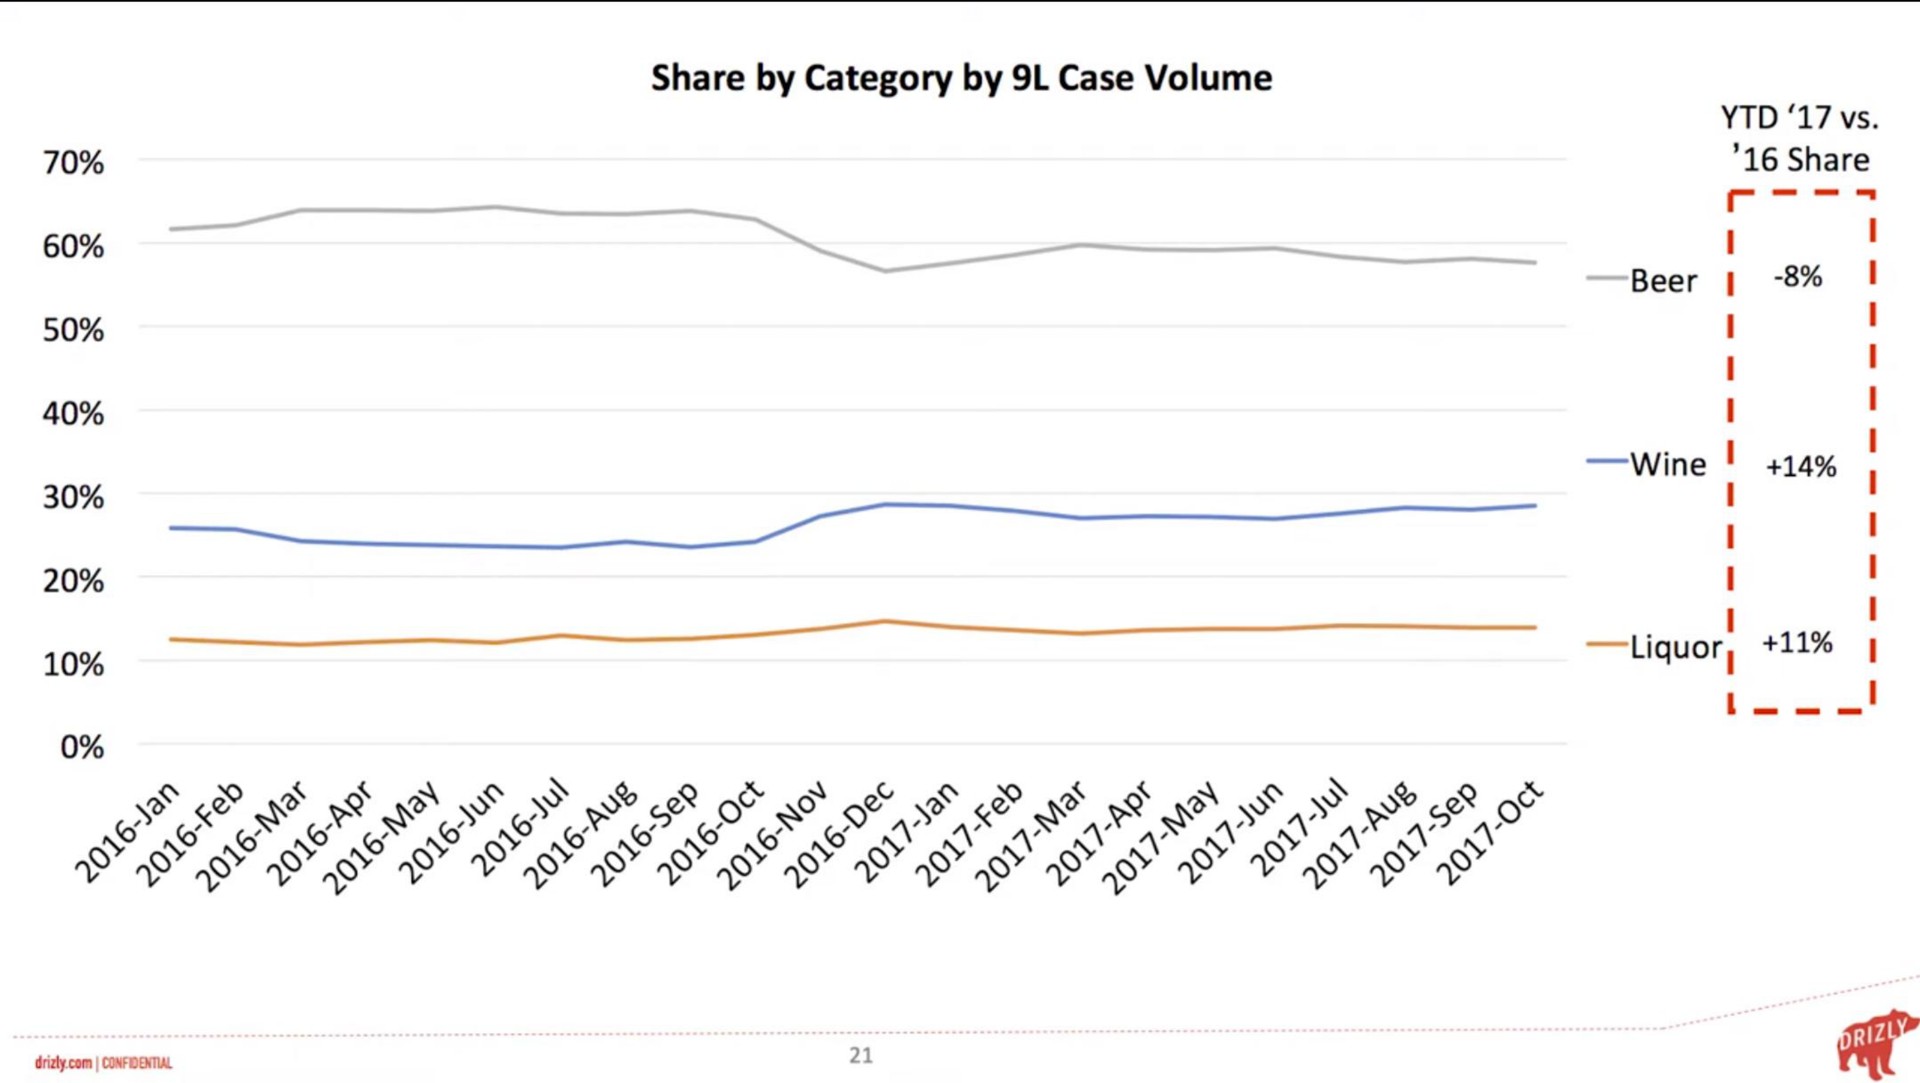 share by category by case volume | Drizly